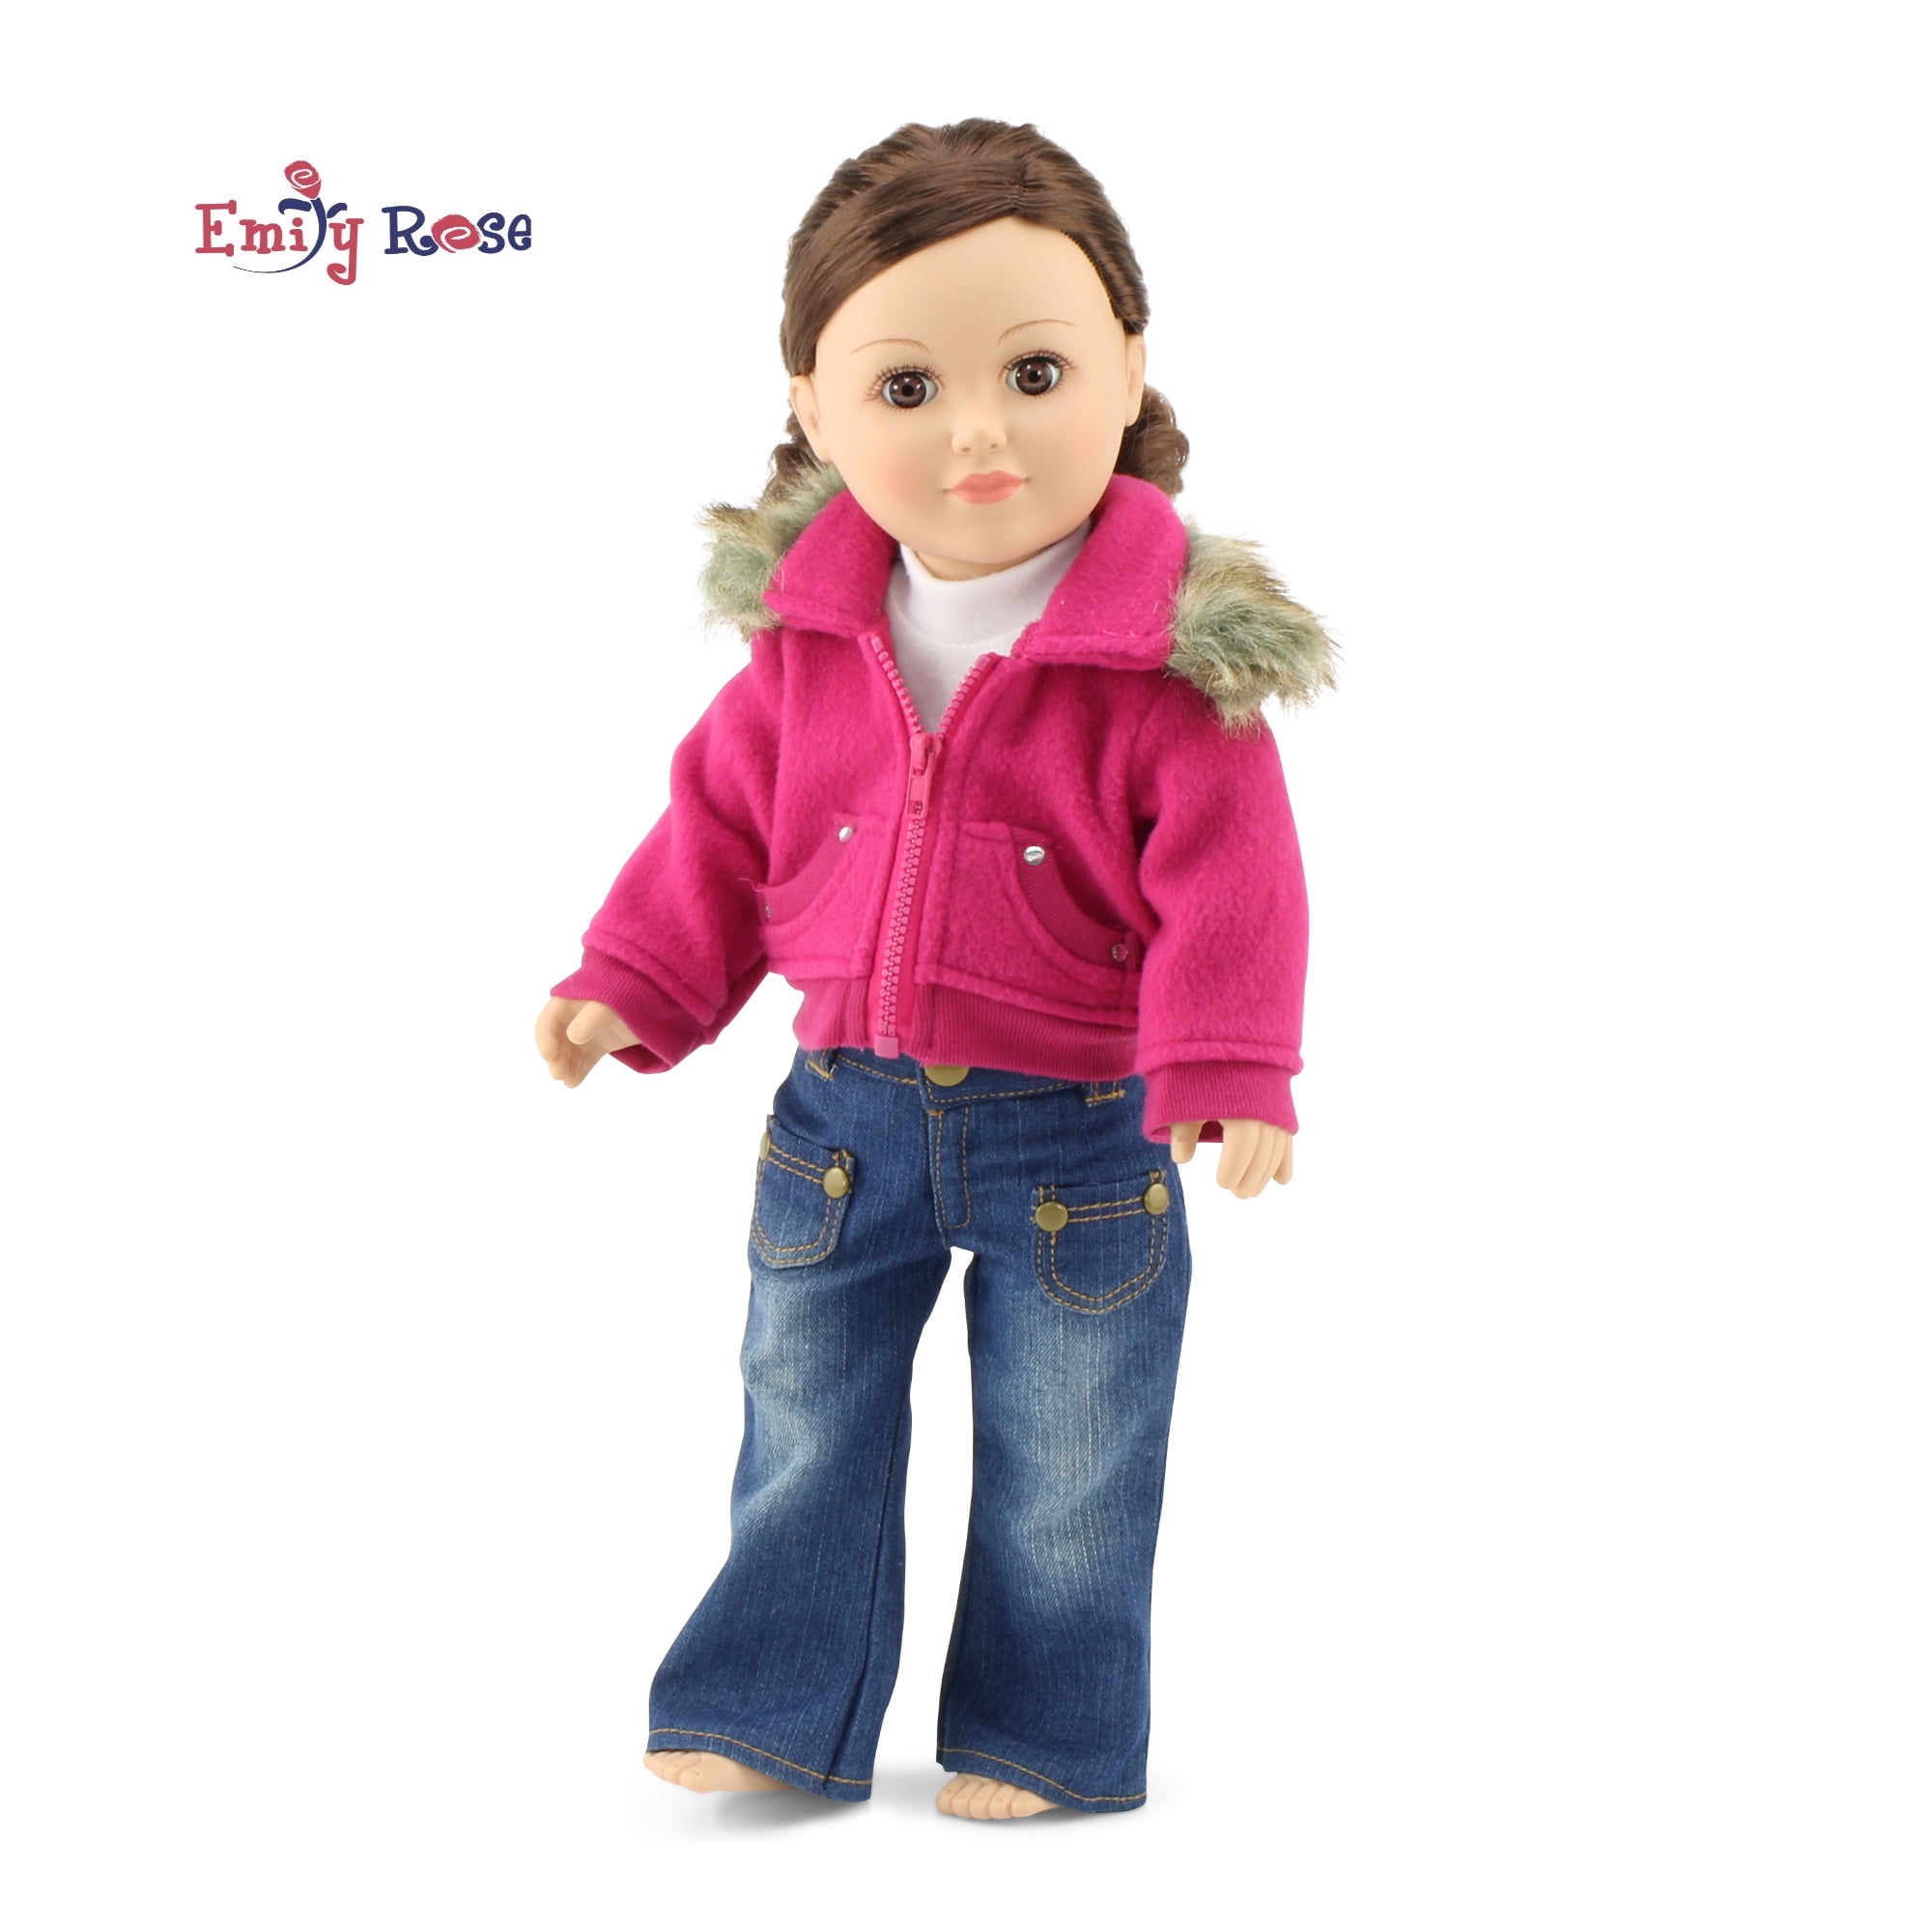 Hot Handmade Accessories Fits 18"Inch American Girl Doll Fashion Sportswear Suit 